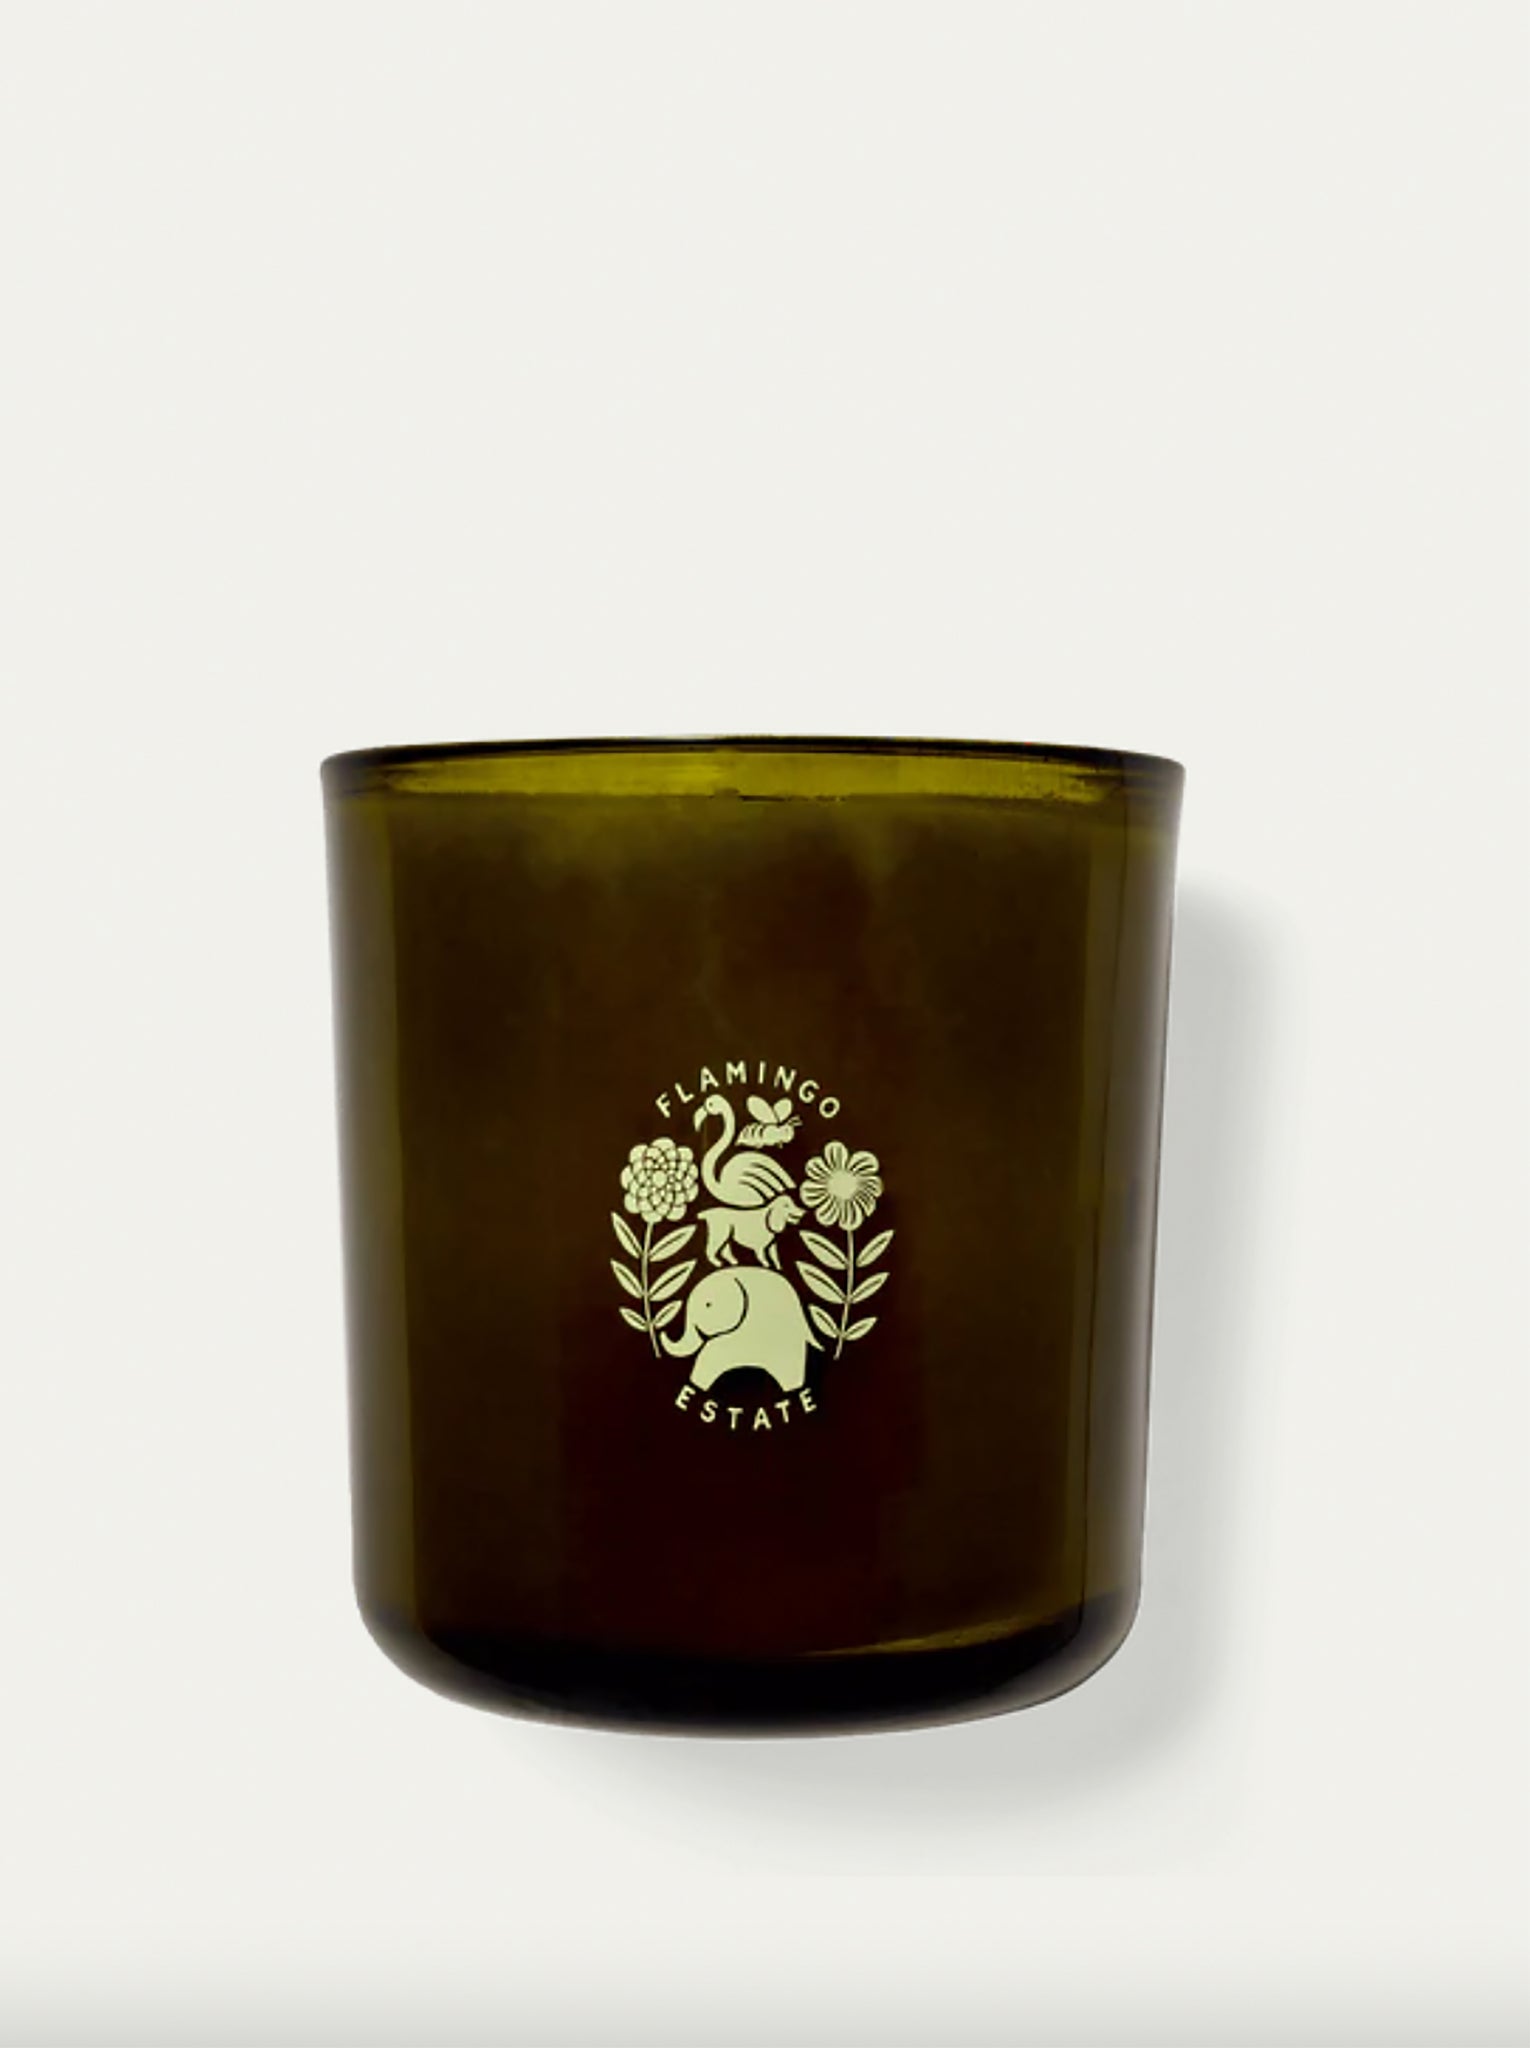 Adriatic Muscatel Sage Candle by Flamingo Estate